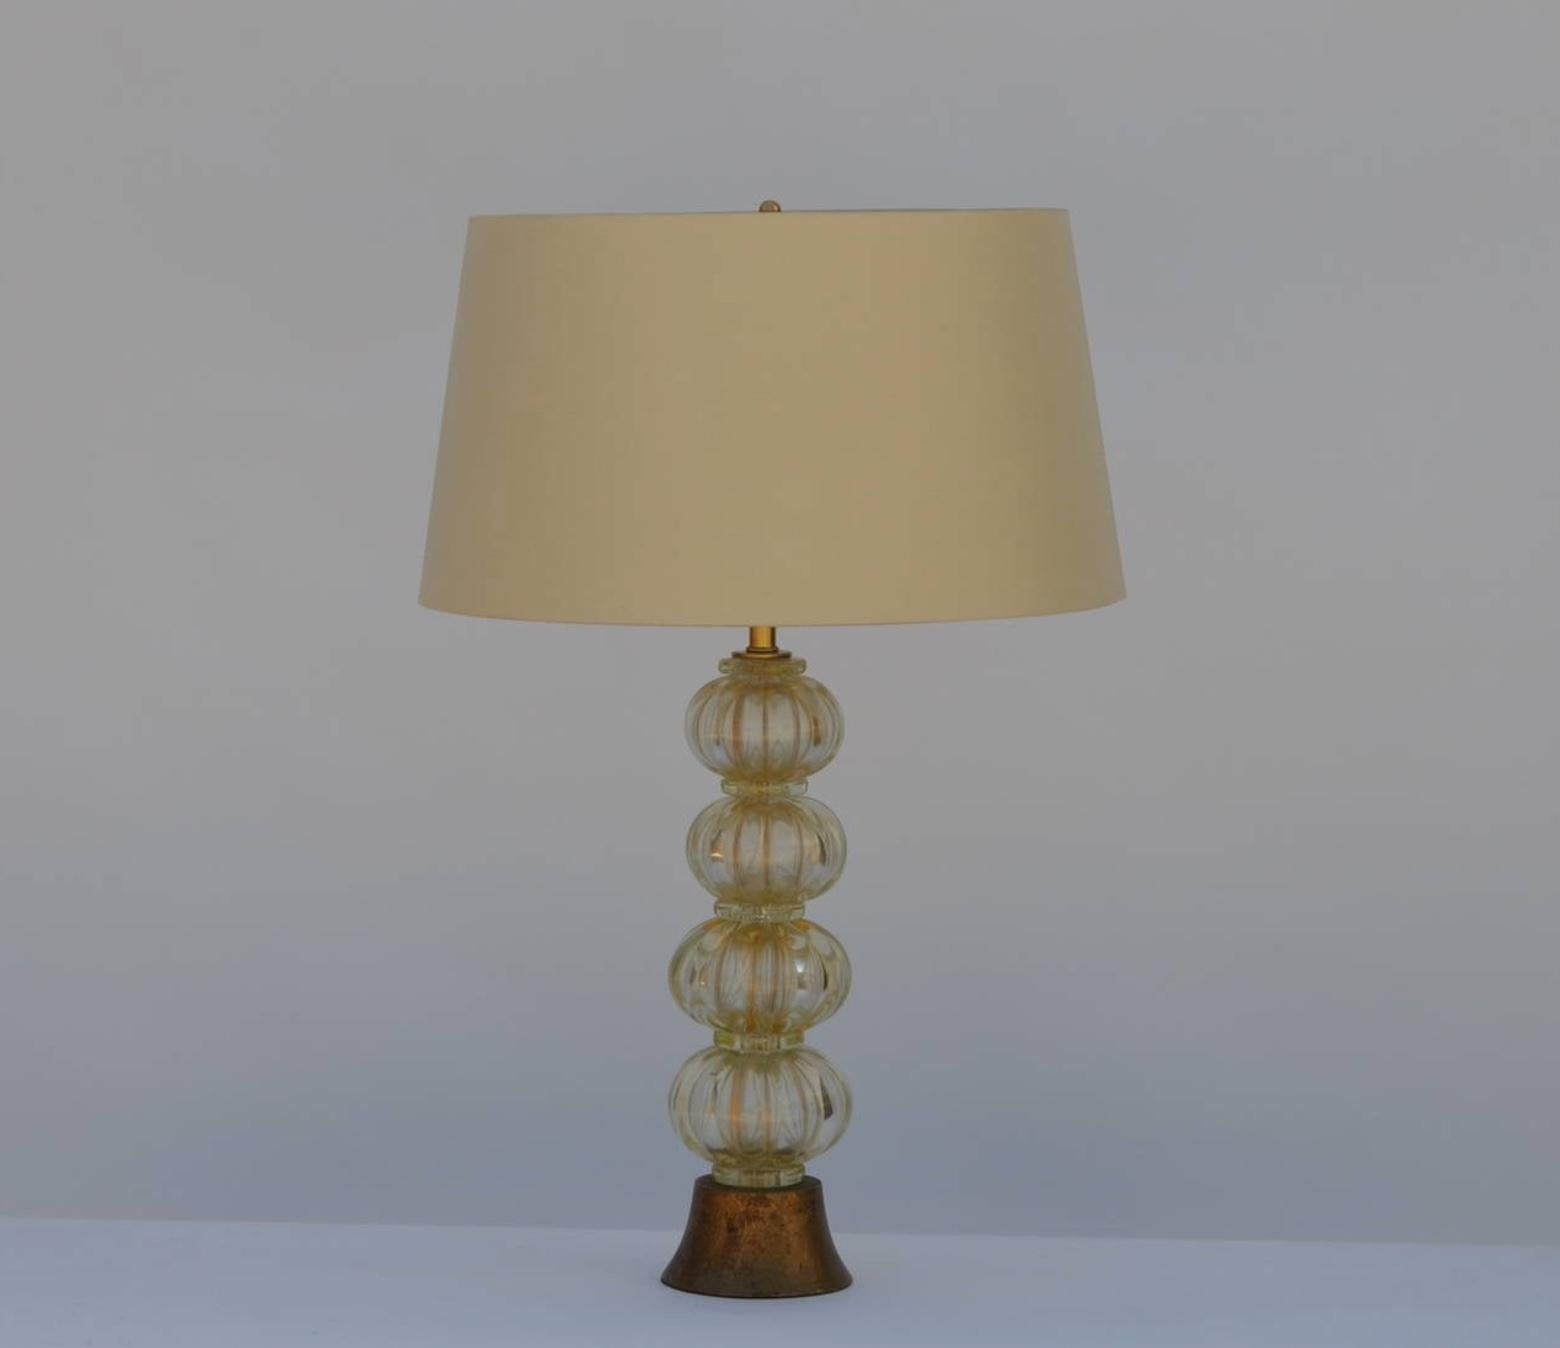 Heavy Gilt Murano glass stem lamp with custom silk shade in the style of Barovier. Gilt wood base. Restored and rewired with gold twist cord.

Custom shade dimensions: upper edge 16 inches, lower edge 19 inches, height 10.5 inches. Overall lamp